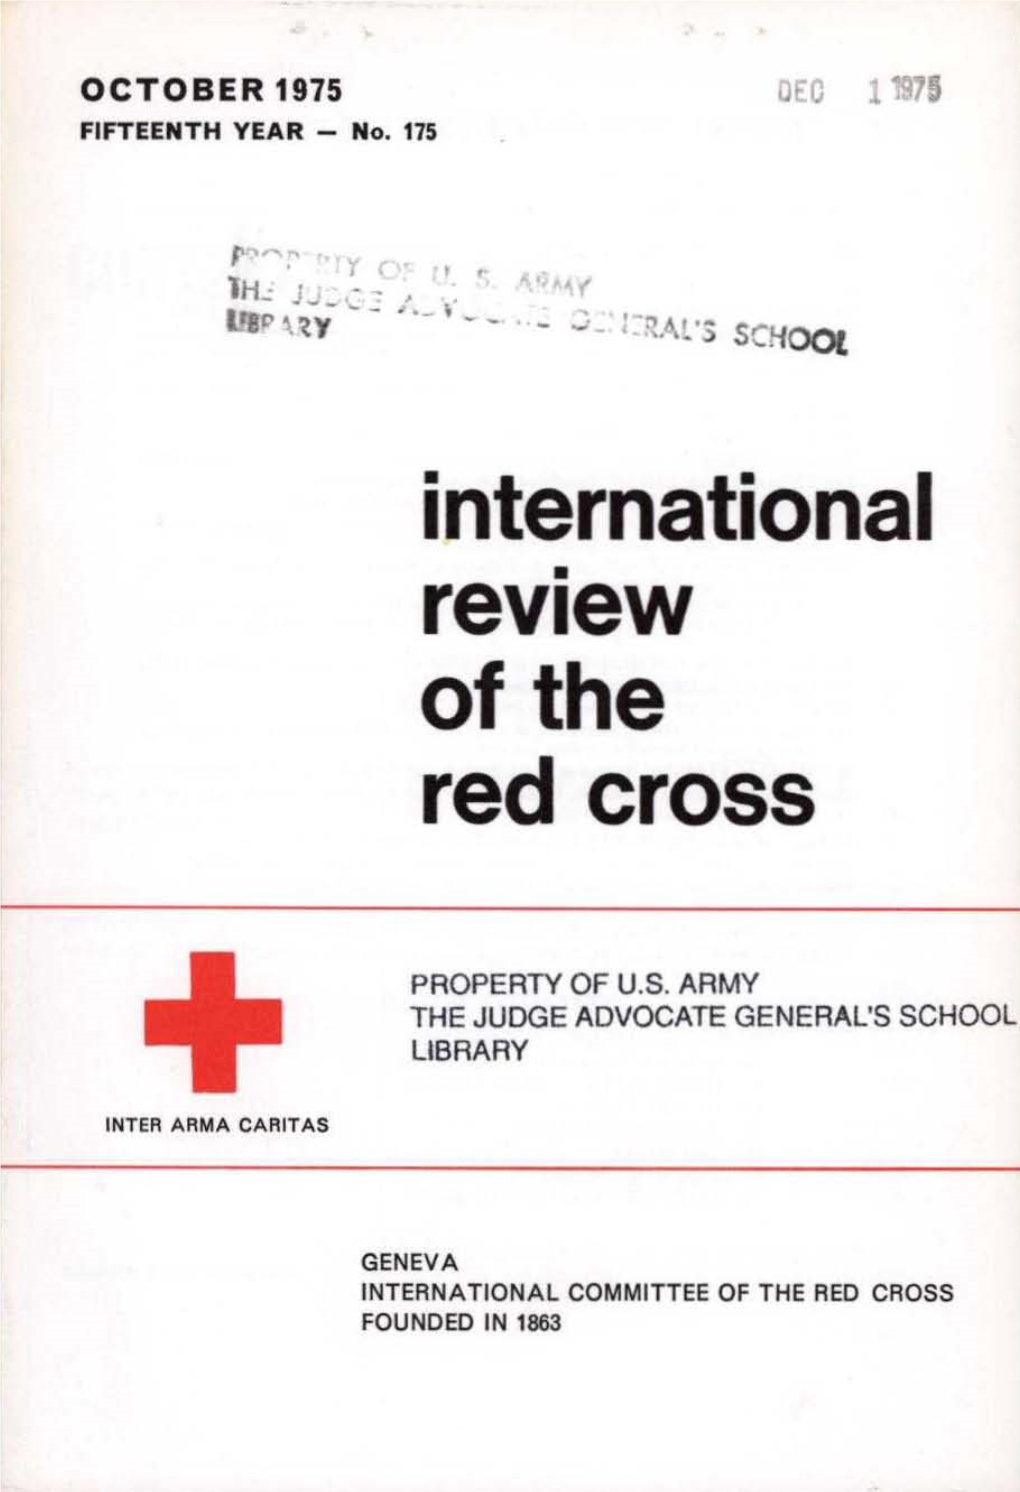 International Review of the Red Cross, October 1975, Fifteenth Year